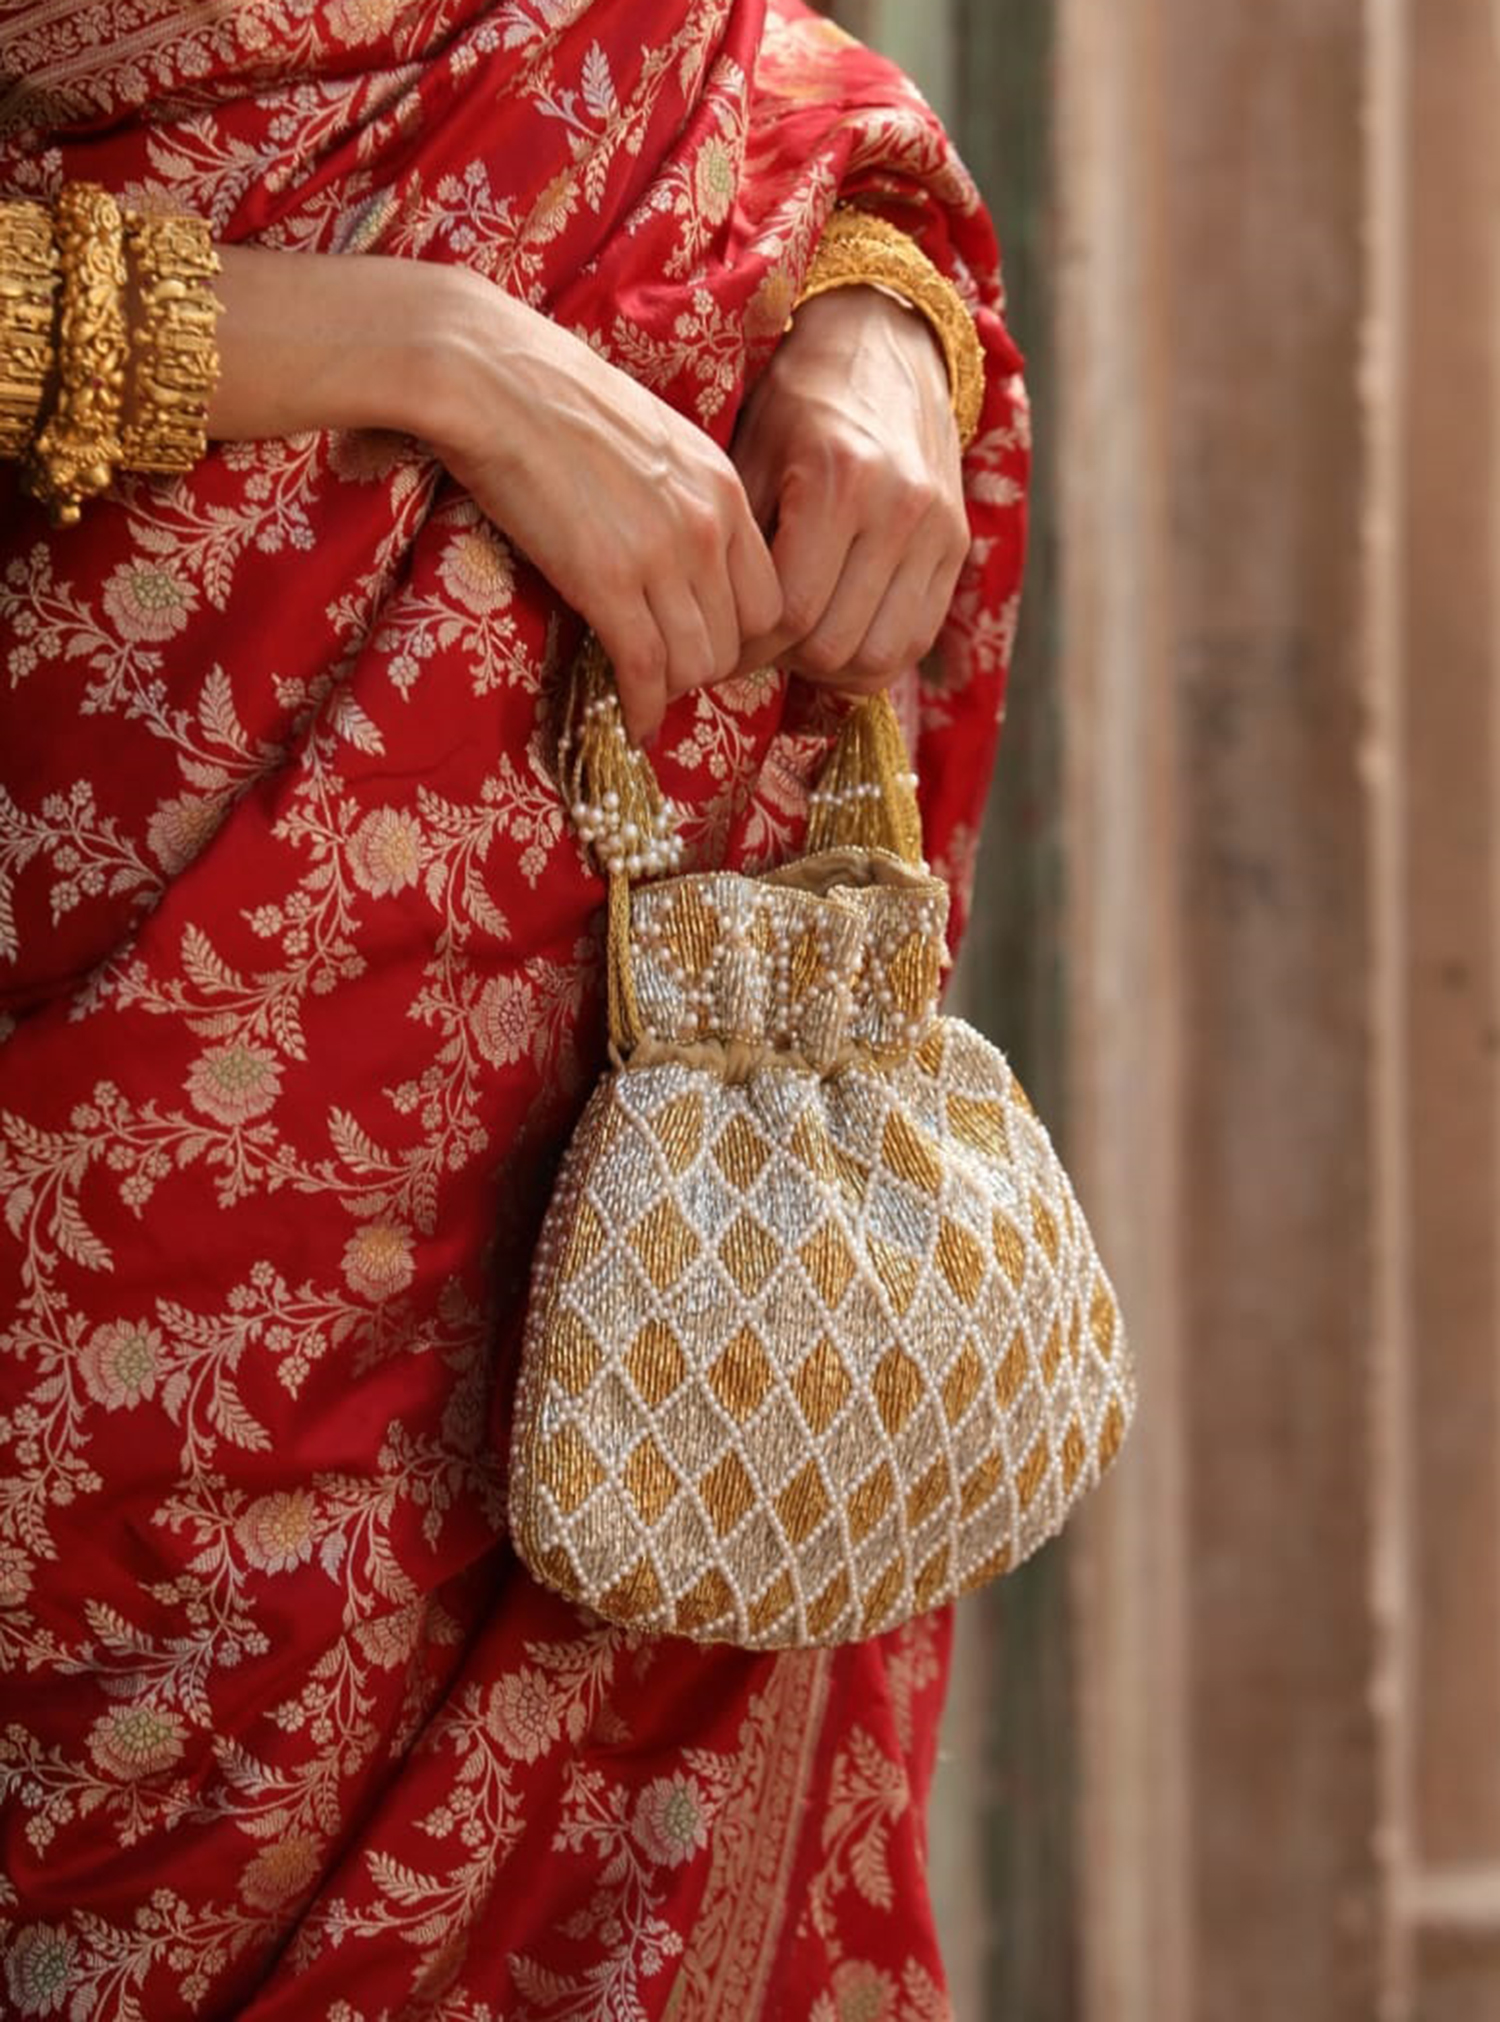 F2121 potli Fully embellished potli bag in check patterns. Bags from ...